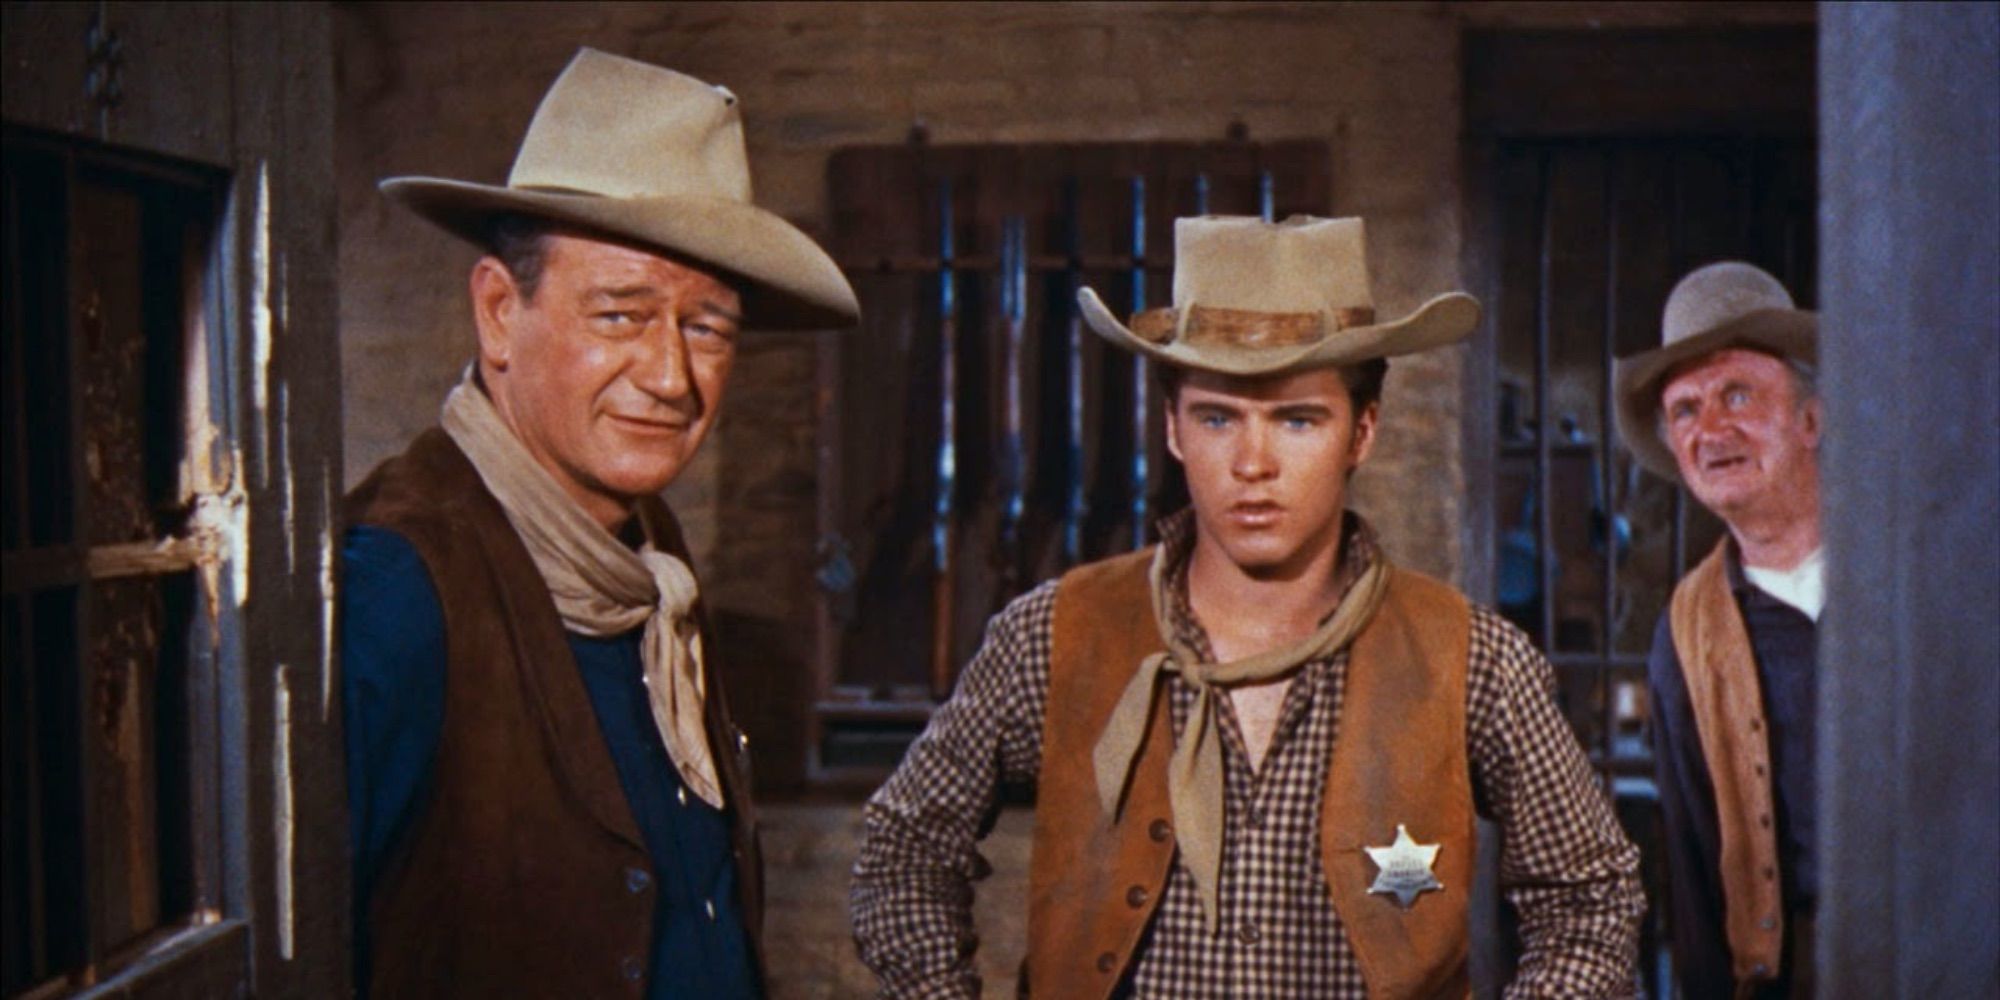 John Wayne as Sheriff John T. Chance and Ricky Nelson as Colorado Ryan standing in a jail in Rio Bravo